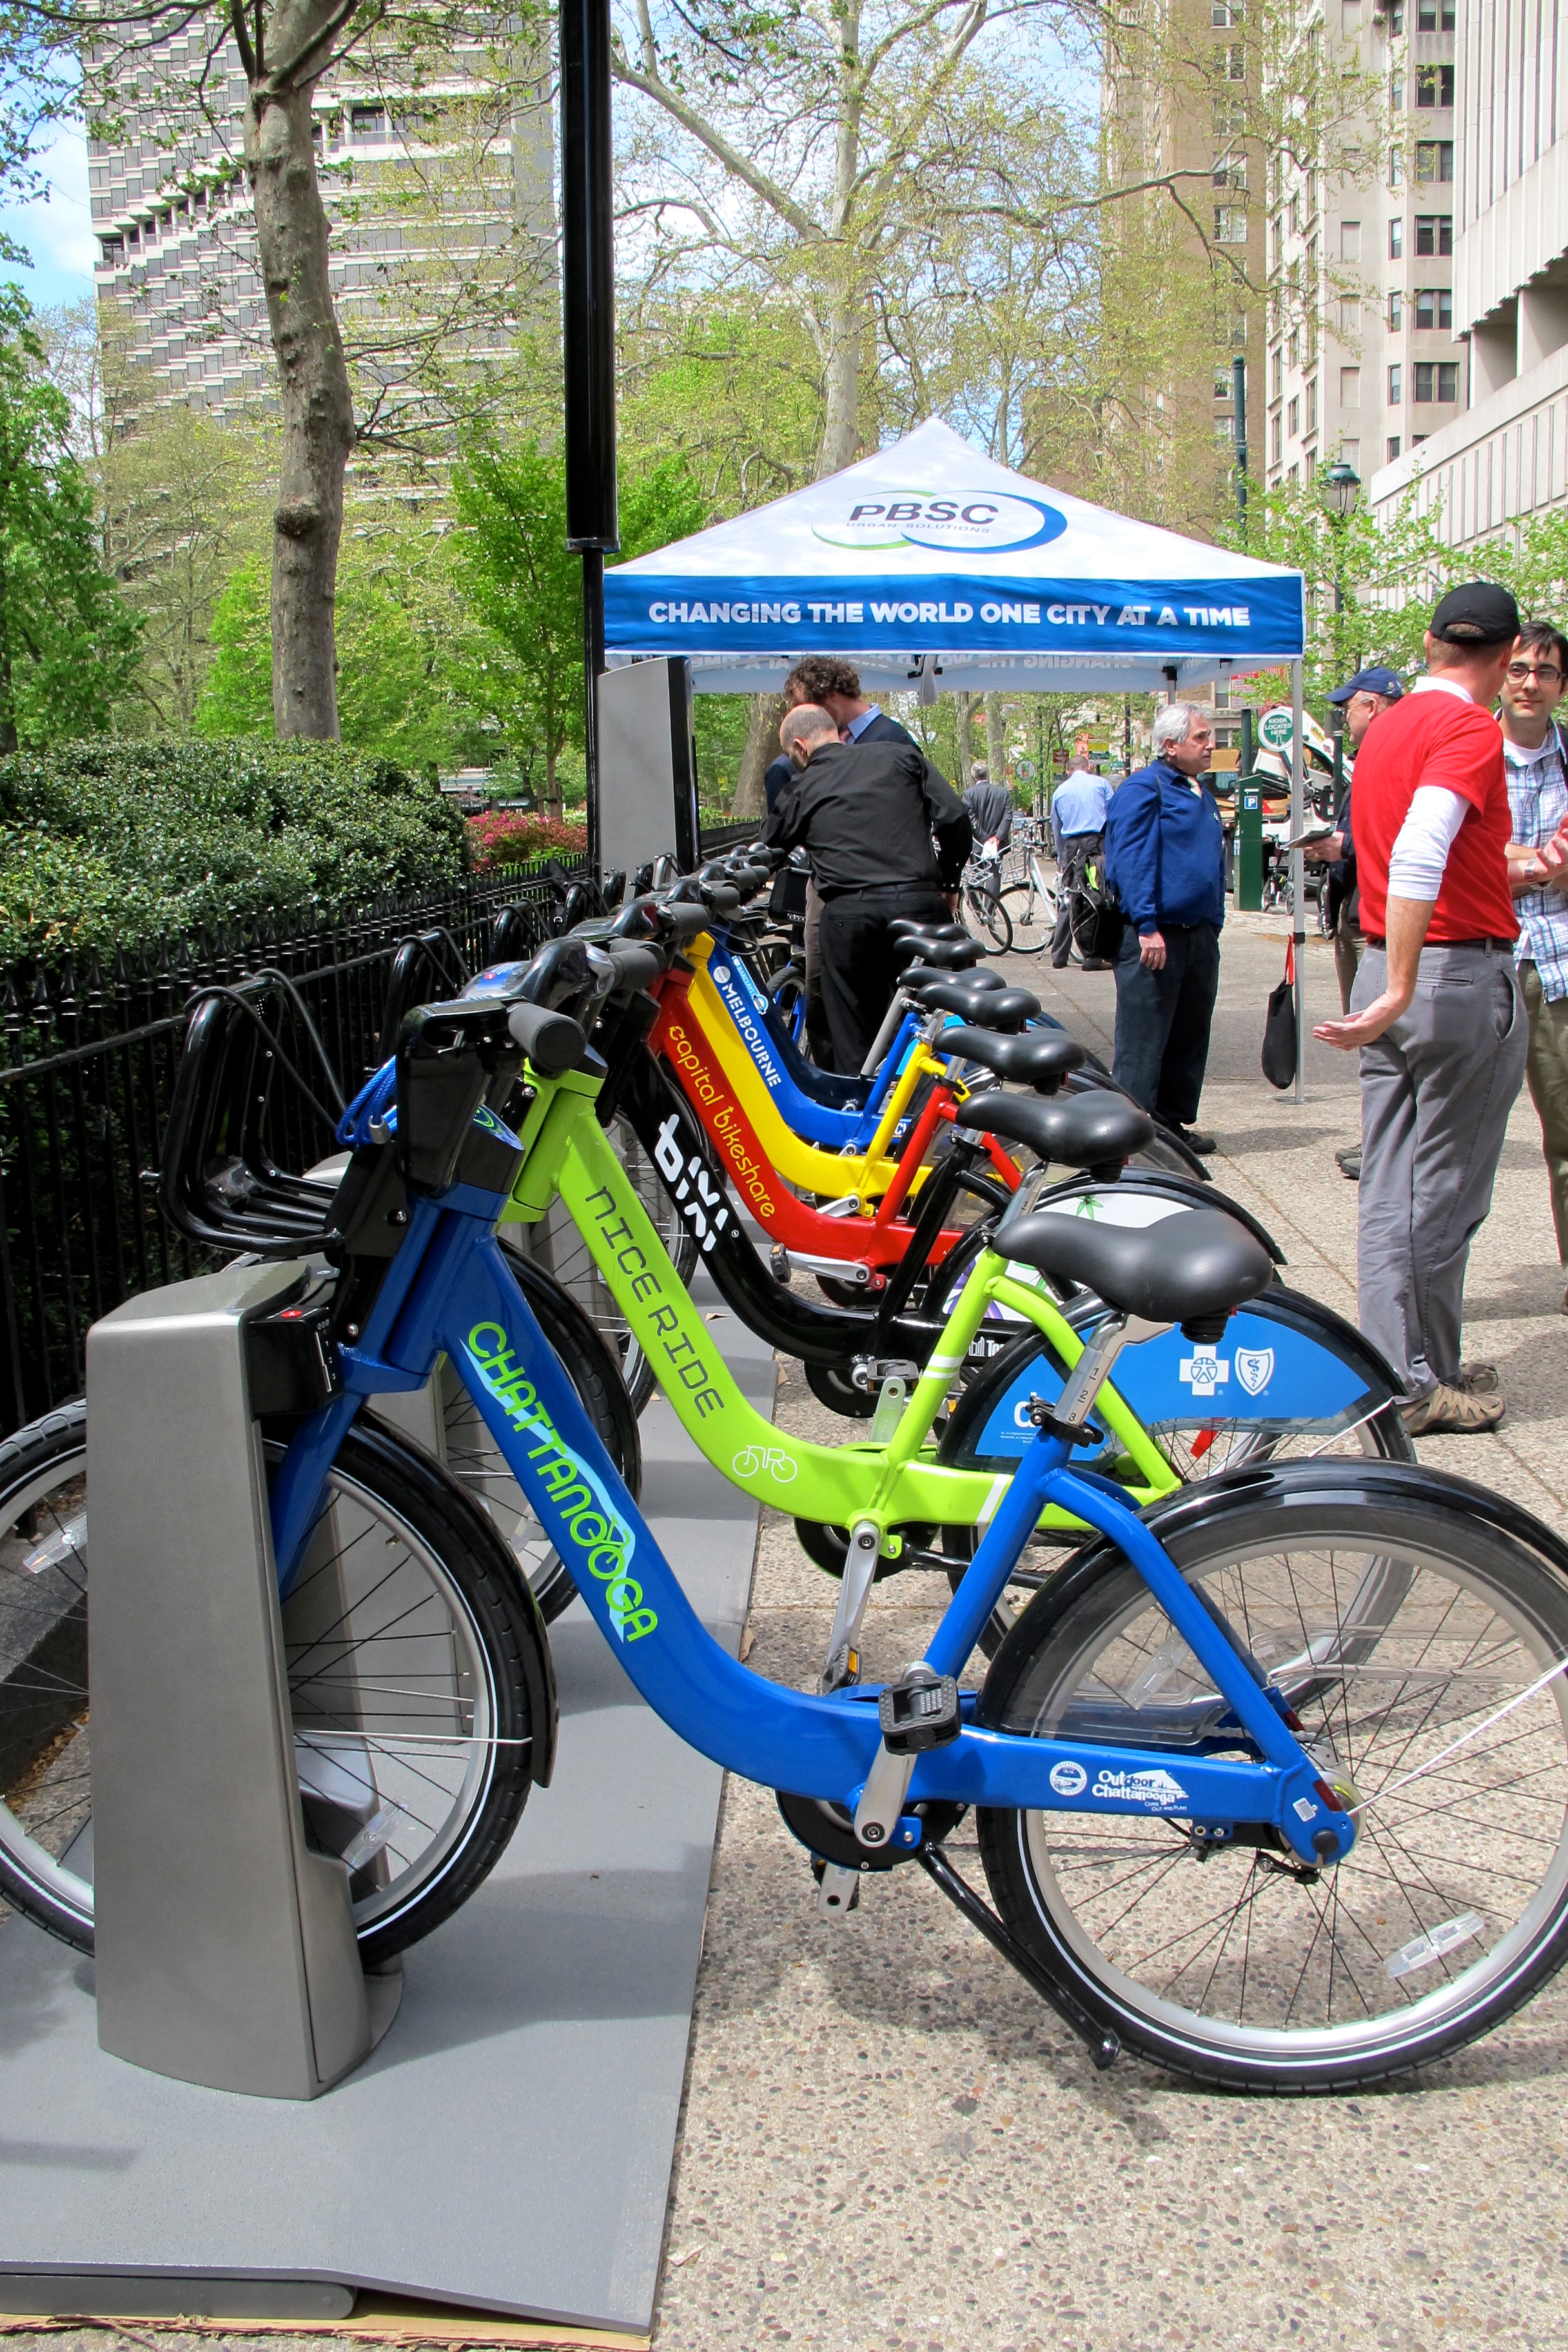 Alta / PBSC bike share station with examples from several systems.